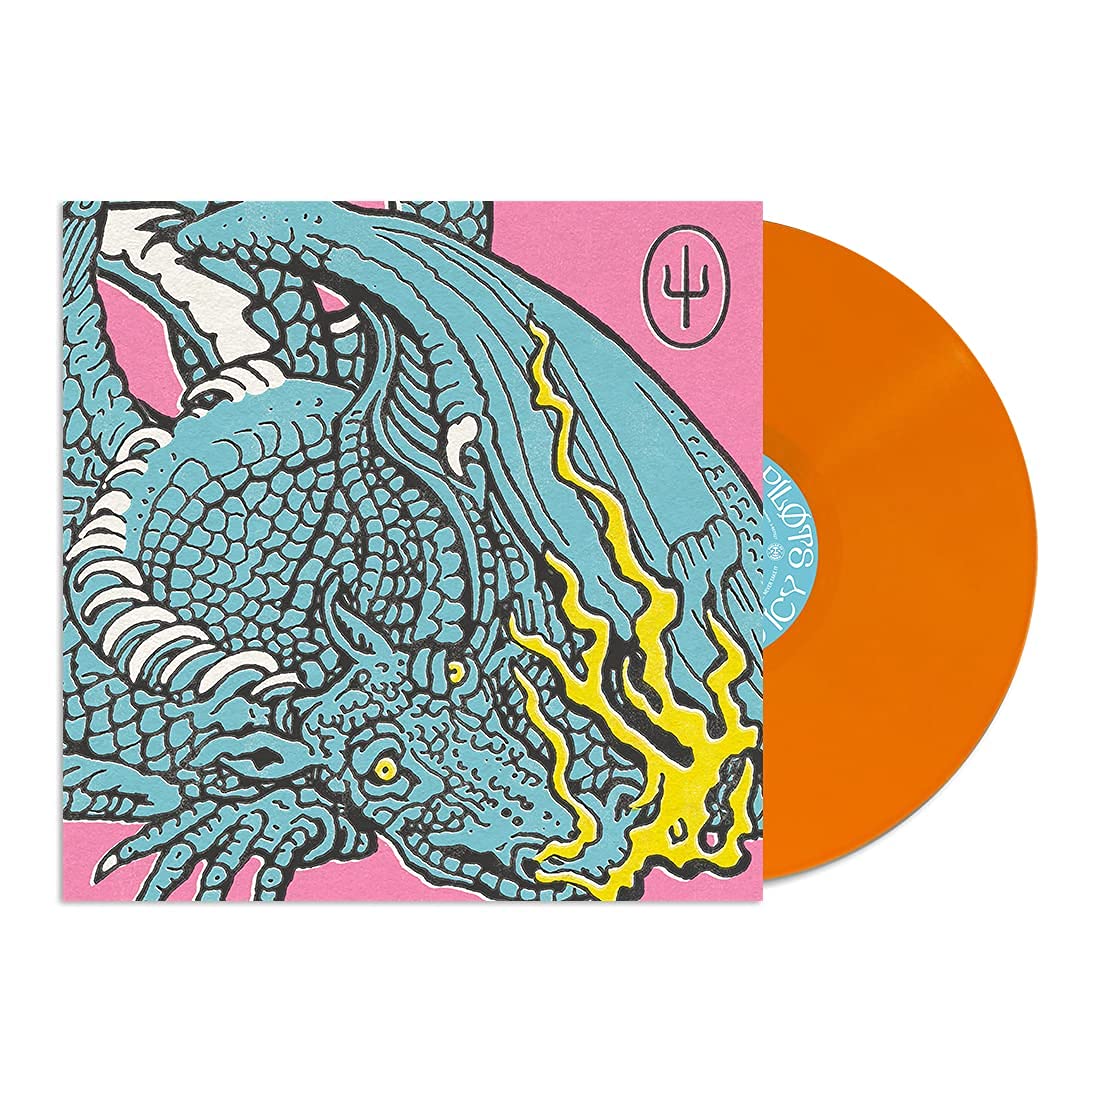 Scaled And Icy (Limited Edition, Orange Vinyl) [Vinyl]